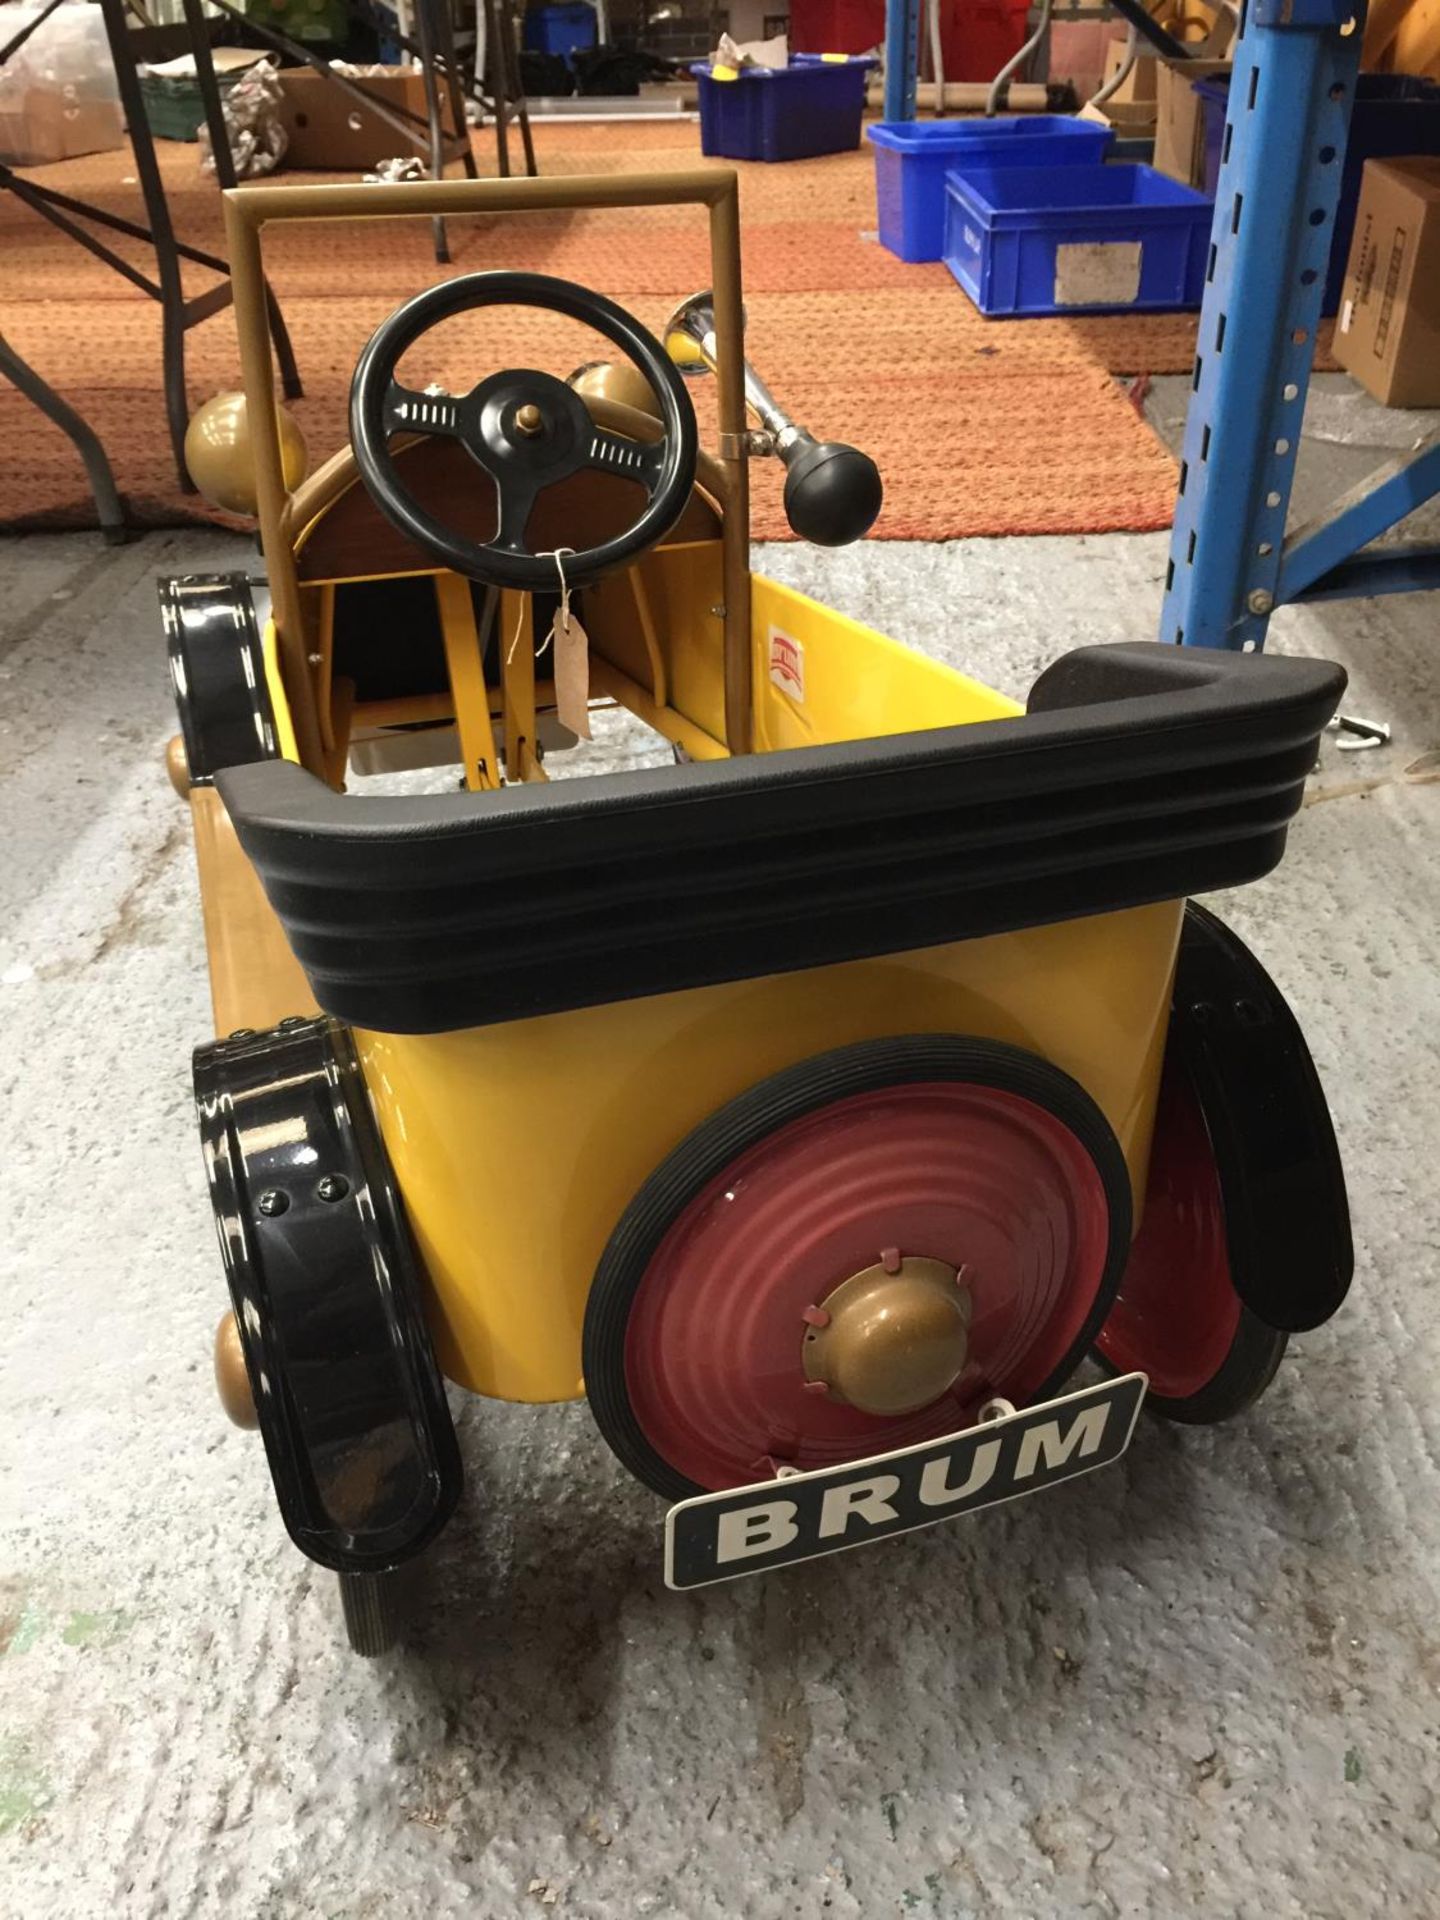 A BRUM PEDAL CAR WITH WORKING HORN AND CRANK HANDLE - Image 5 of 5